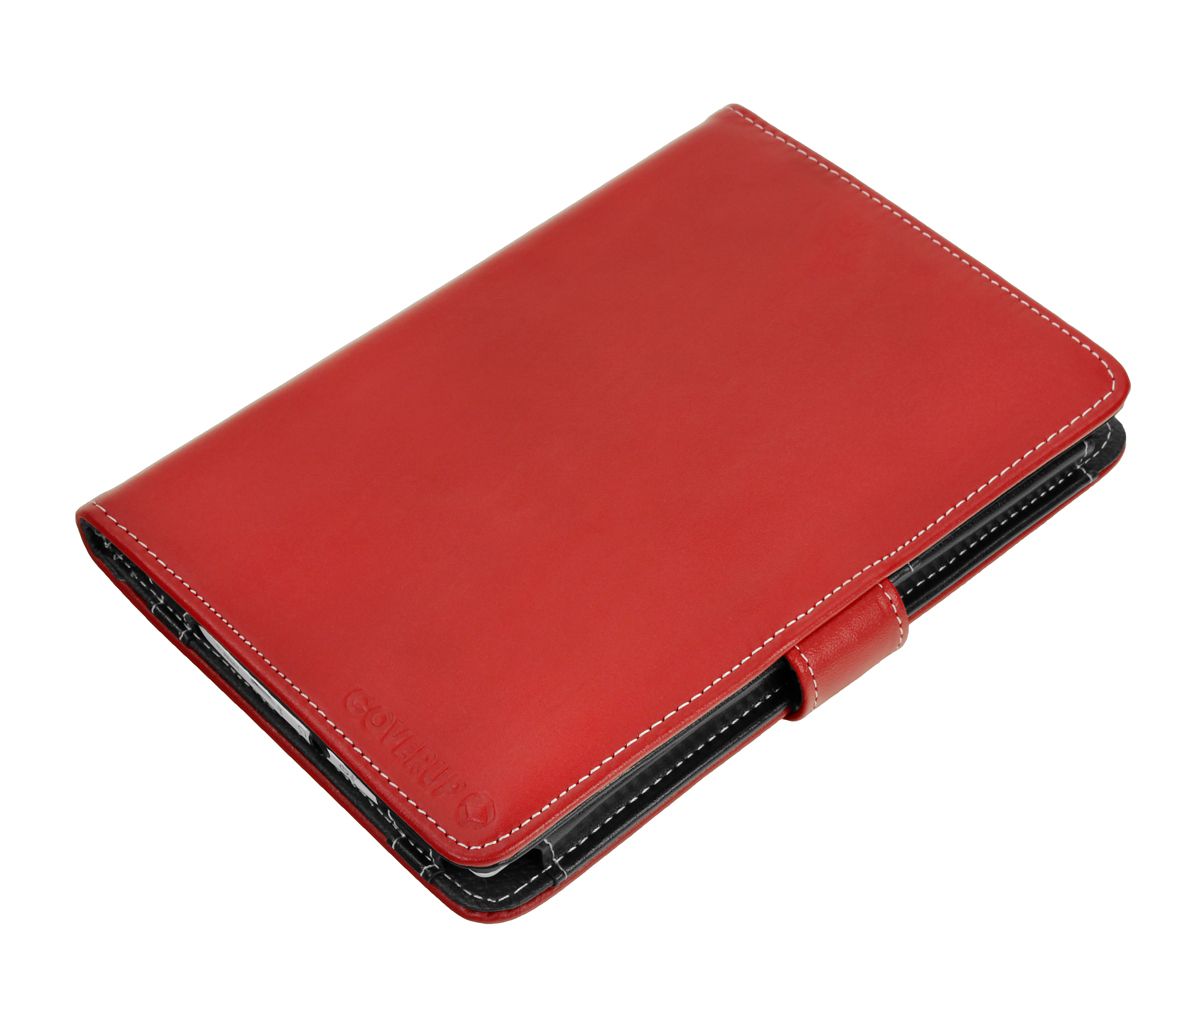  PRS T1 PRS T2 eBook Reader Book Style Leather Cover Case Red